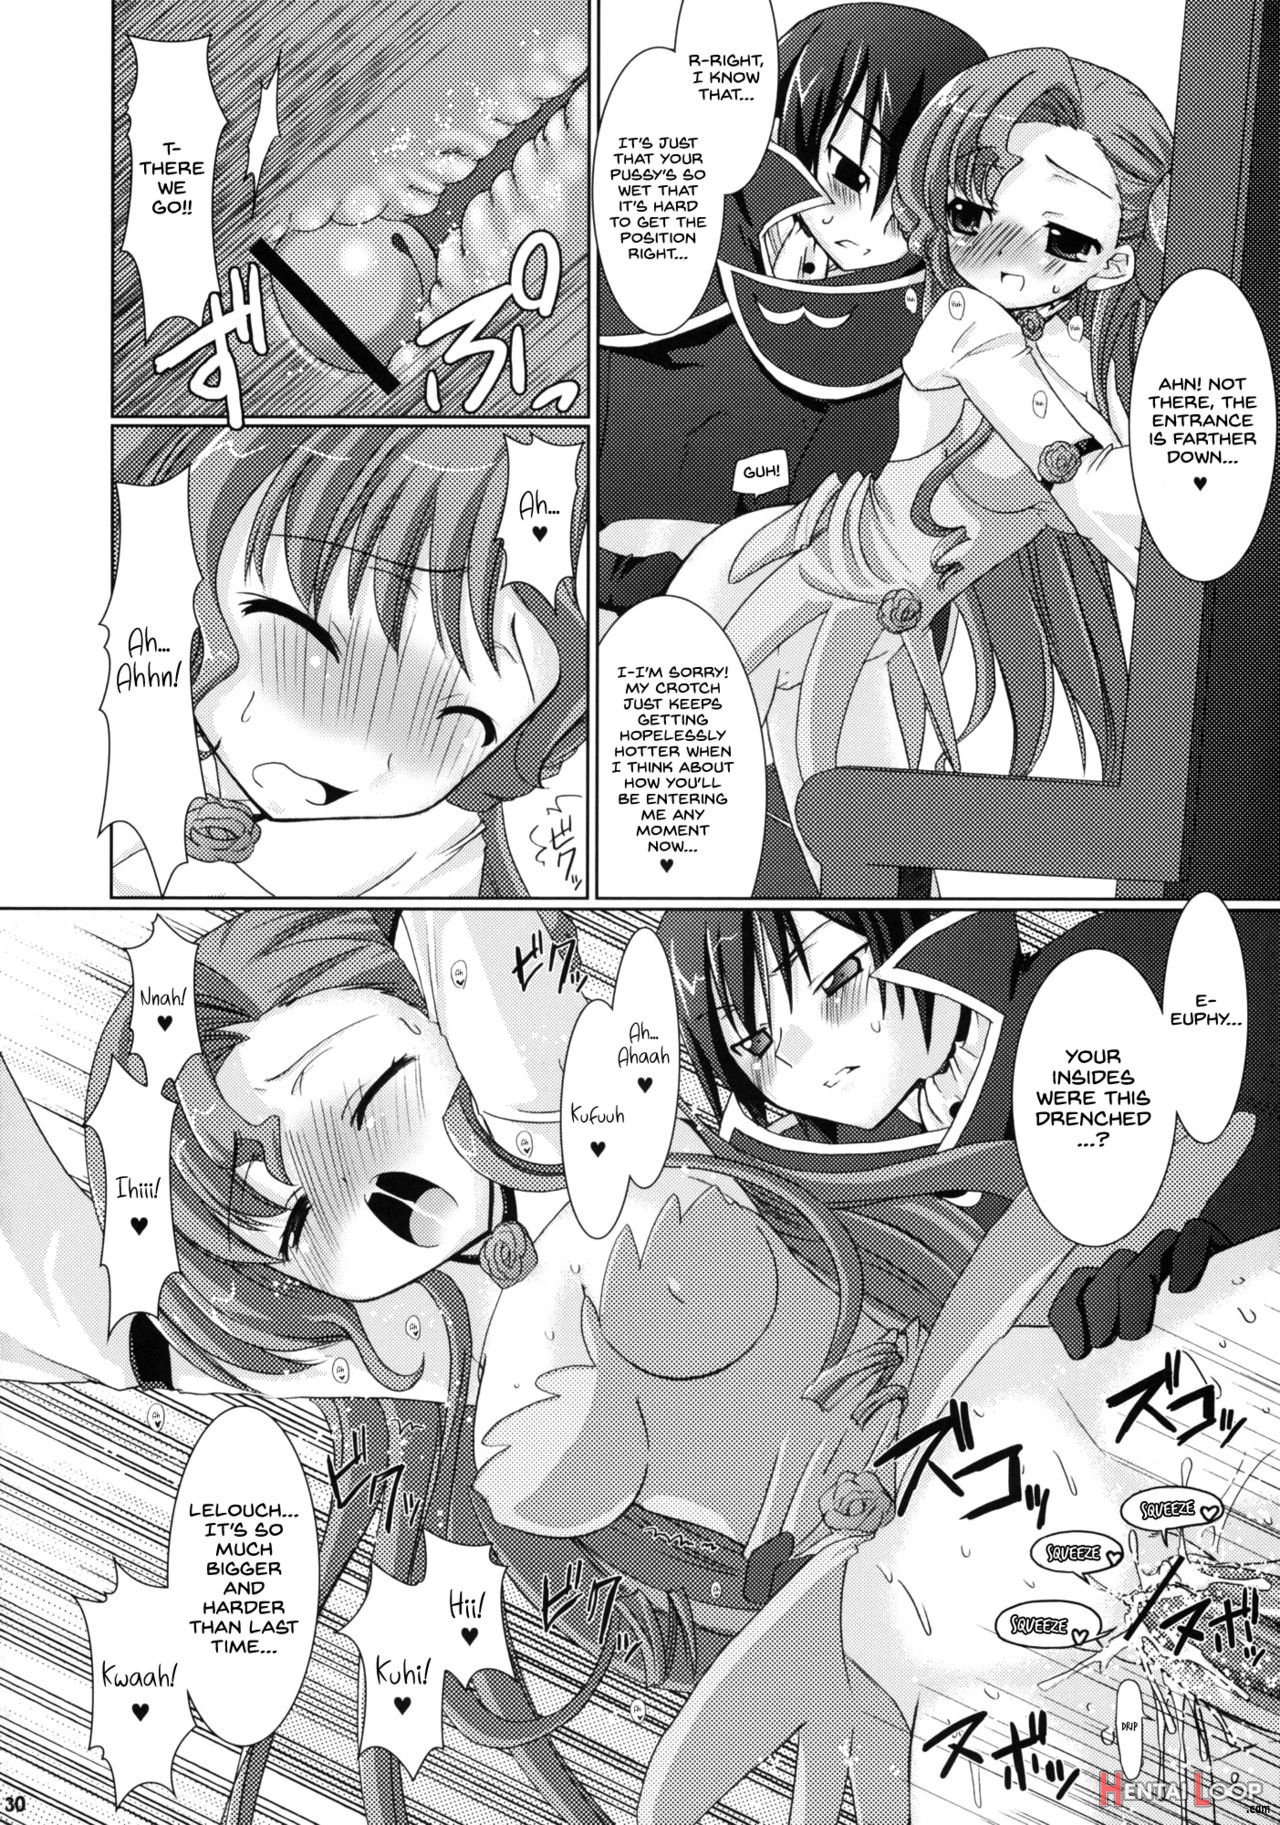 Kouhime Kyouhime page 30